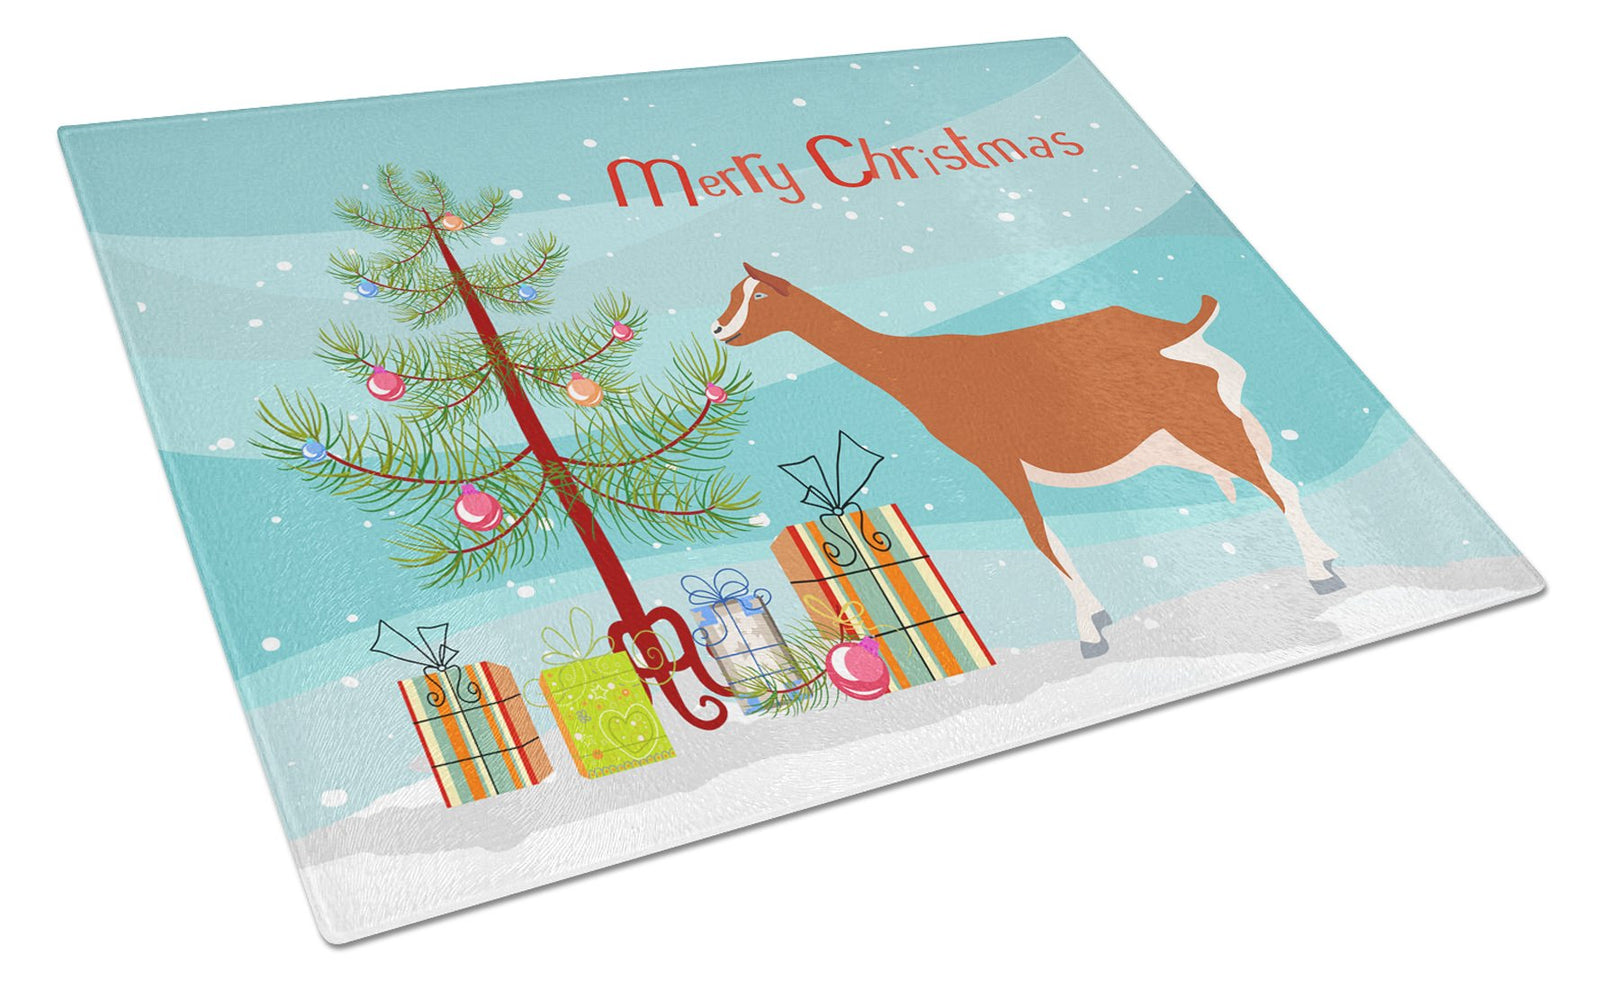 Toggenburger Goat Christmas Glass Cutting Board Large BB9248LCB by Caroline's Treasures